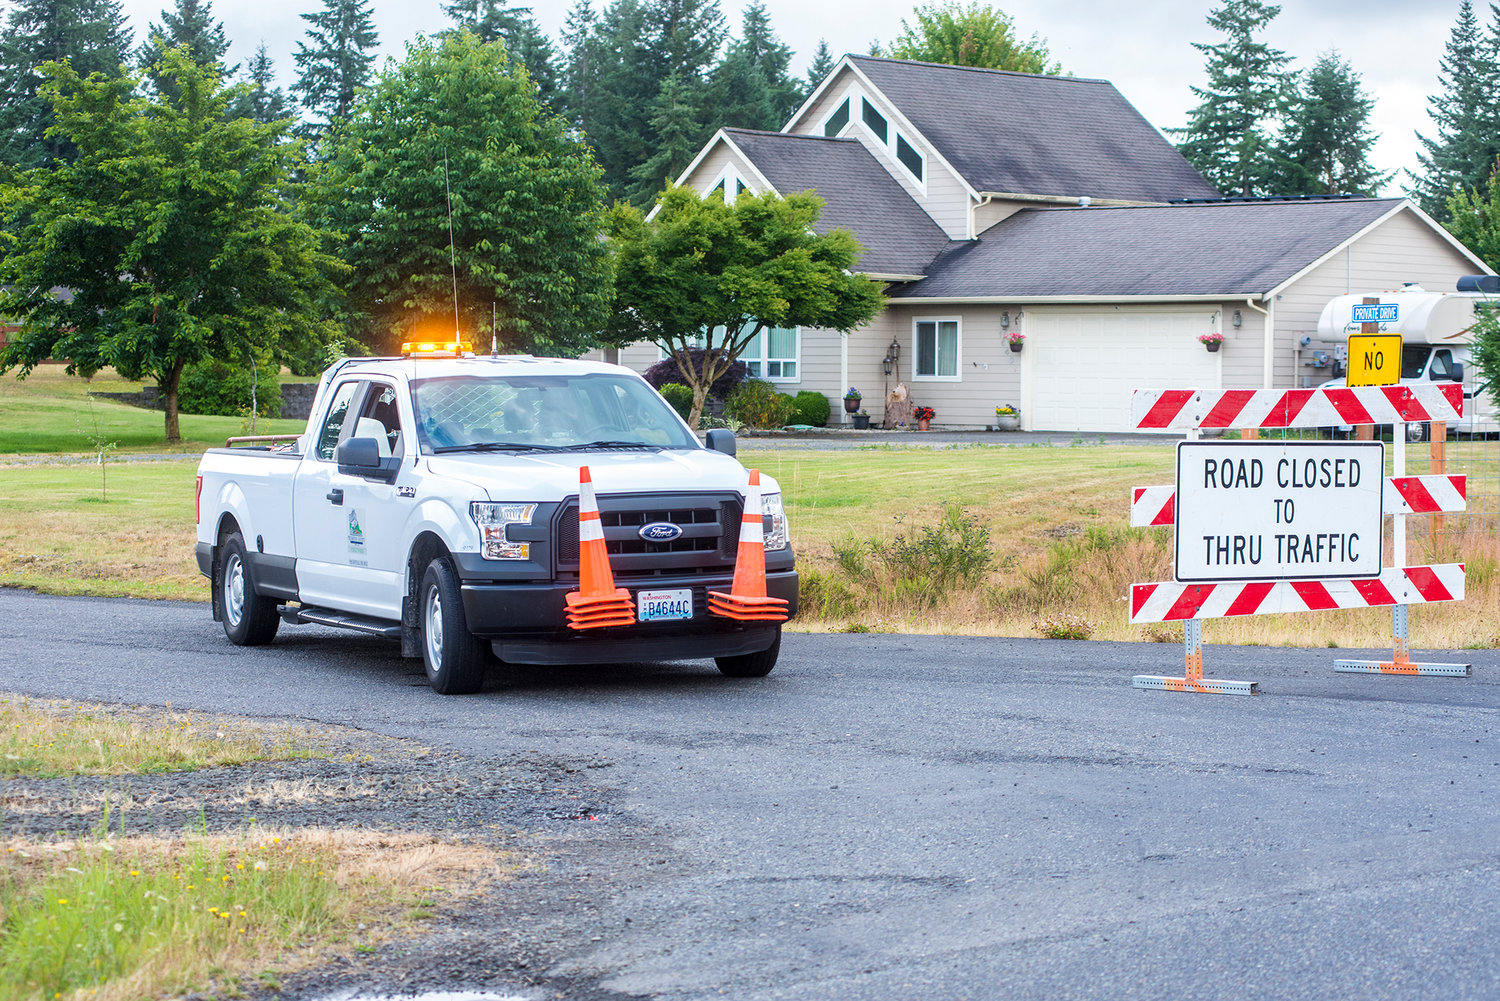 Authorities blocked off Southwest Sheldon Lane in Rochester on Wednesday while searching a property in connection with the 2009 disappearance of Nancy Moyer.